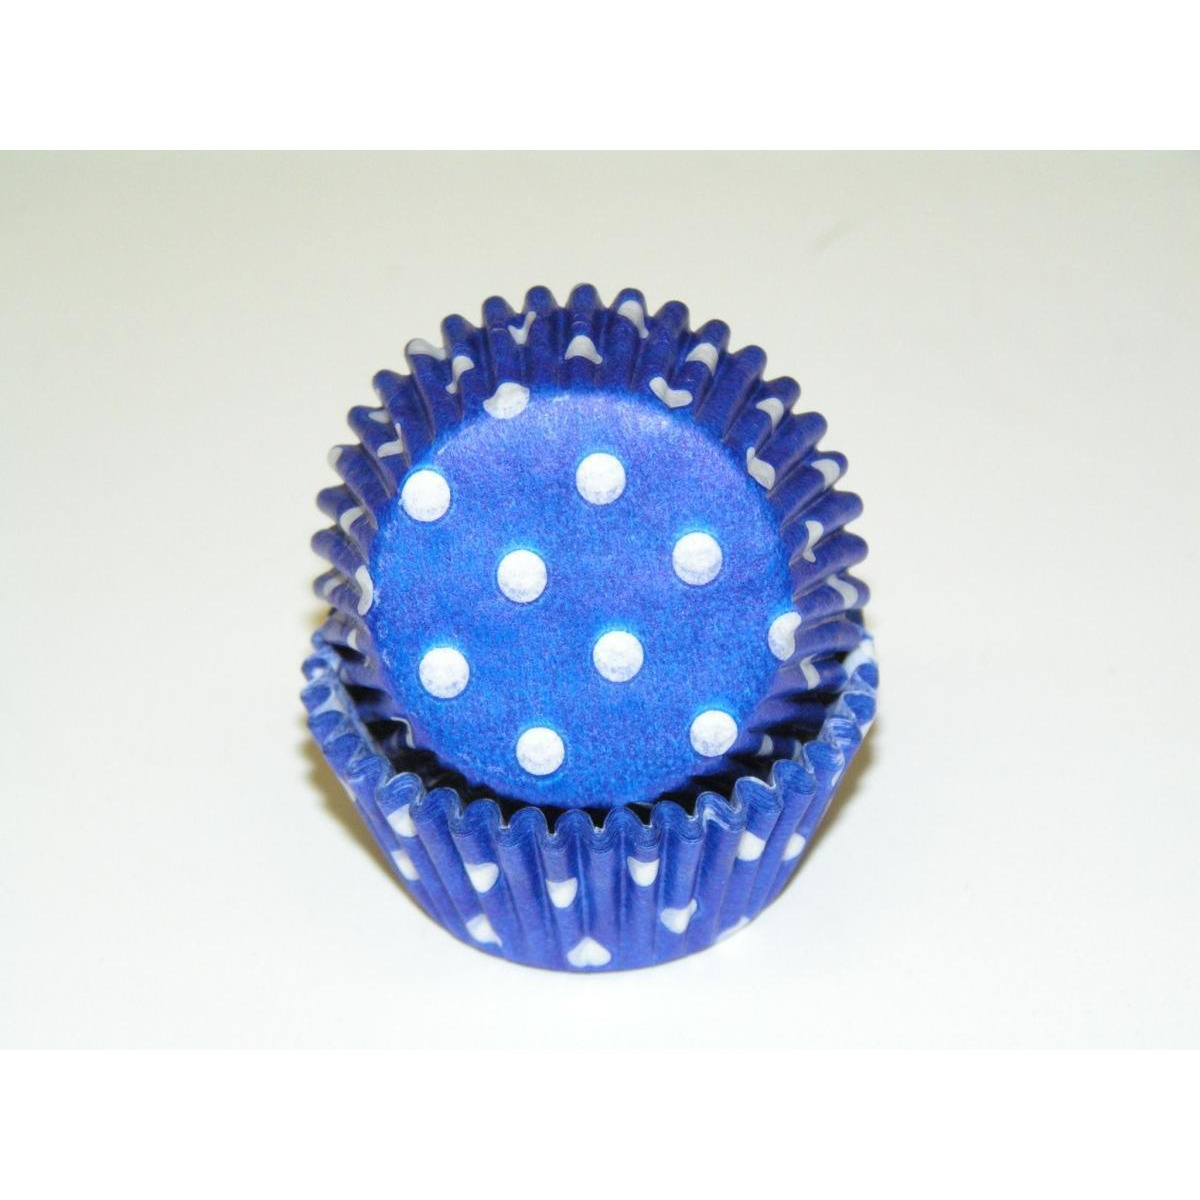 Viking -275 POLKA DOT BLUE 0.75 x 1.38 in. Greaseproof Baking Cup with Polka Dot Design - Blue - 1000 Piece